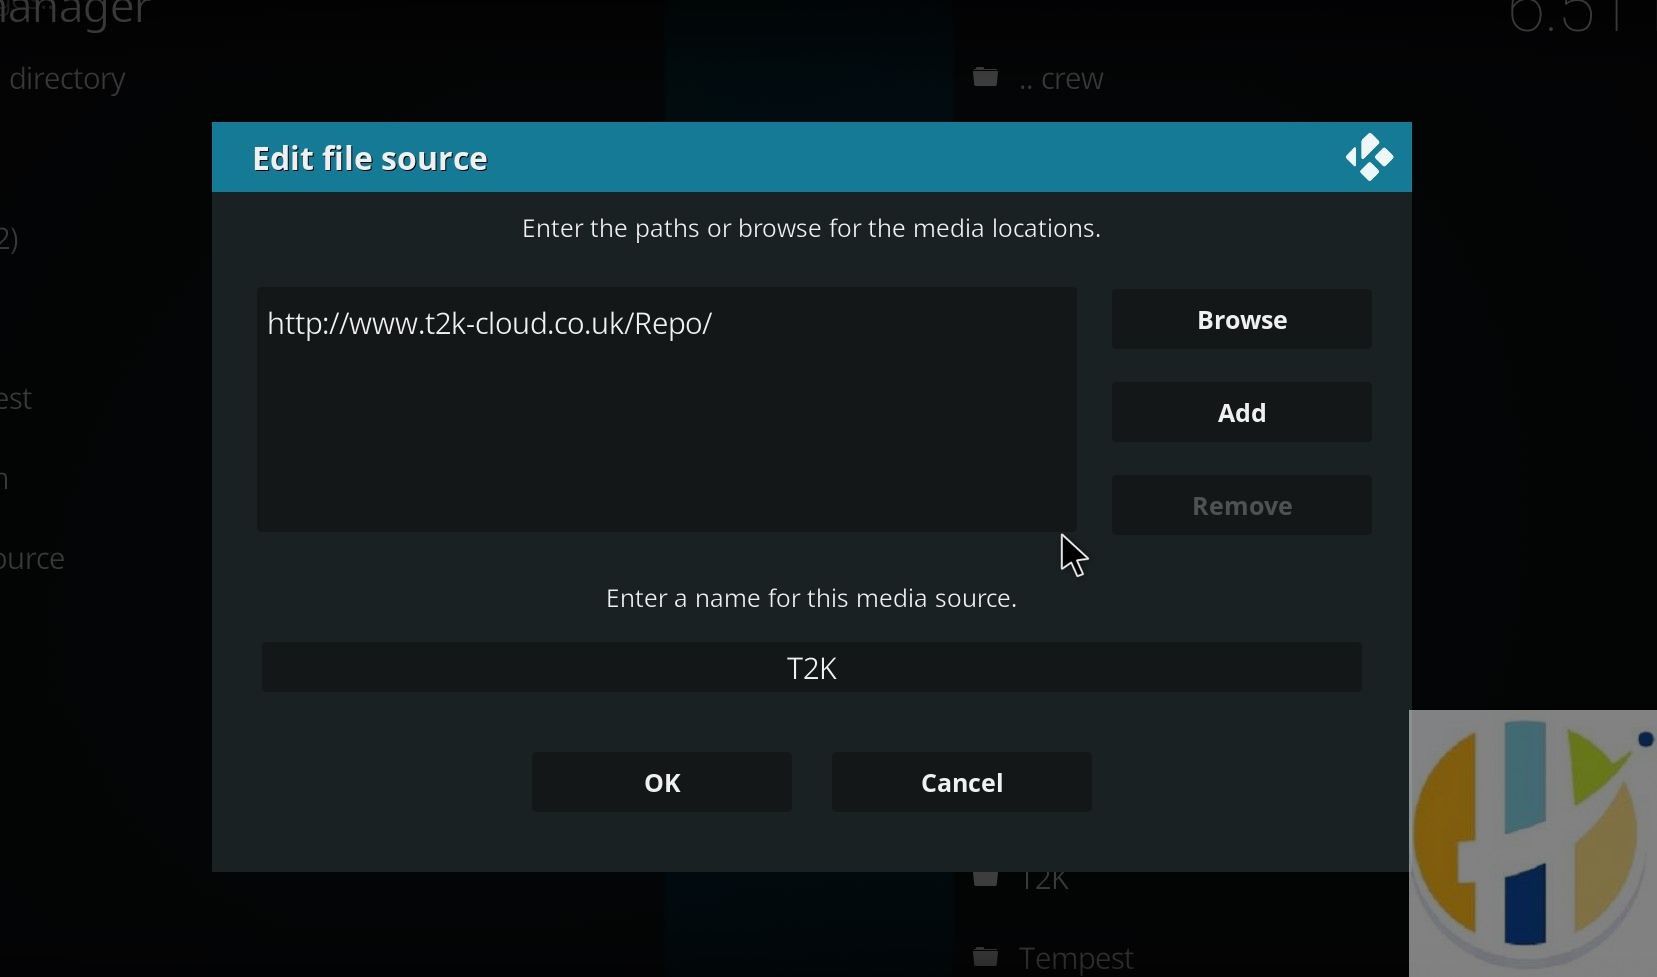 how to install add ons to kodi 18.4